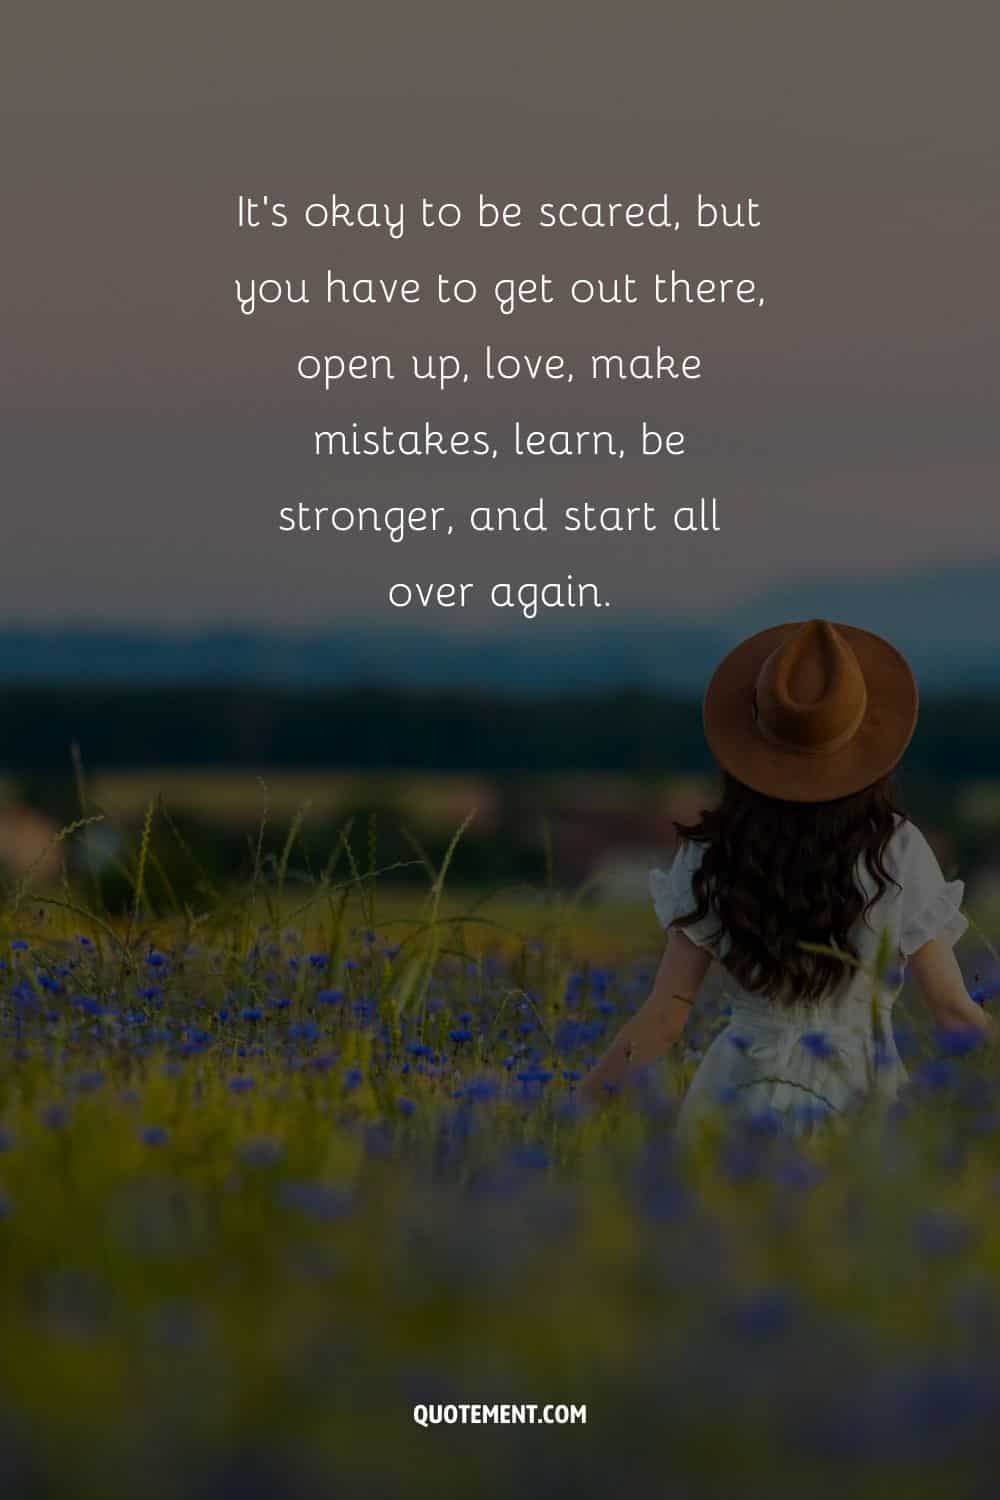 “It’s okay to be scared, but you have to get out there, open up, love, make mistakes, learn, be stronger, and start all over again.” — Unknown